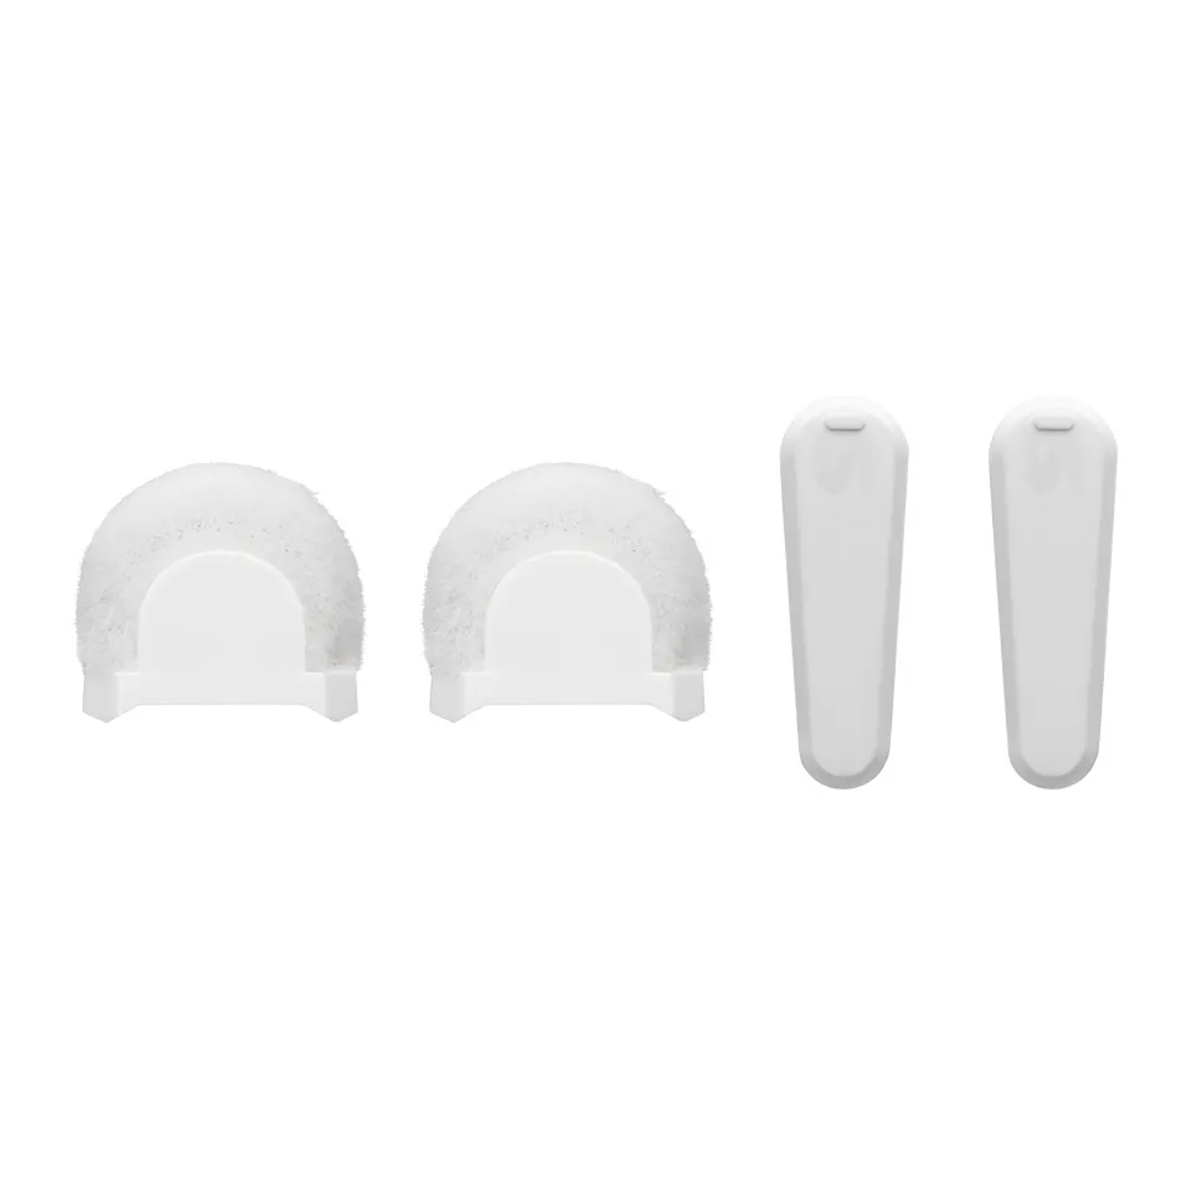 Set of 2 Windscreens and 2 Clips Covers for MoveMic; White